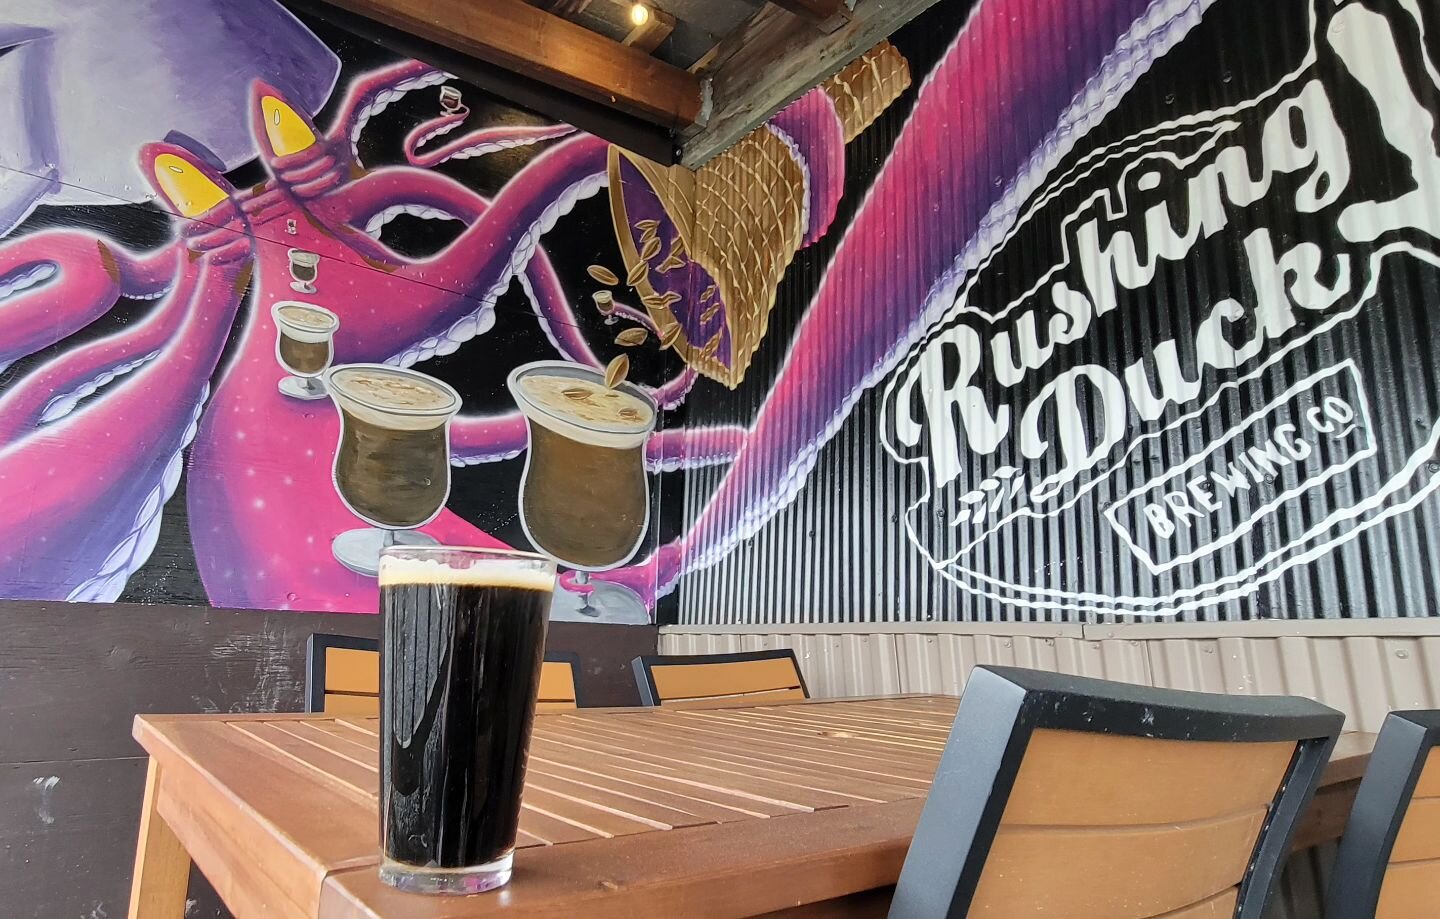 It's a dreary spring day and we can all use a little coffee (beer) to wake up 😴. We are open today 3-8pm for you to have a delicious glass of Beanhead Coffee Porter and play trivia at 6pm! 

No food truck today so feel free to bring your own.

#rush